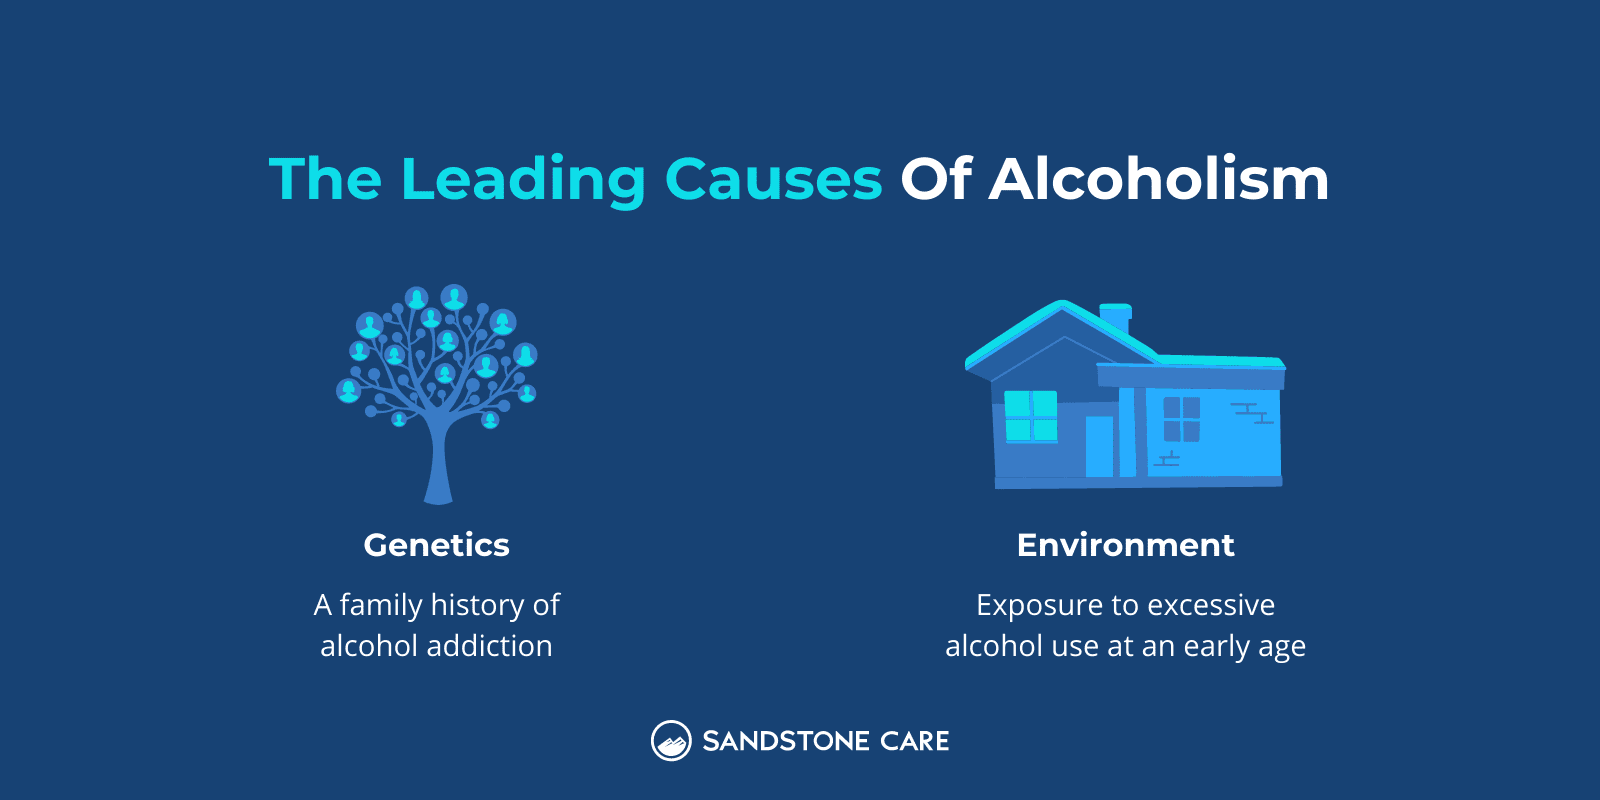 The Leading Causes Of Alcoholism; genetics and environment explained below each graphical representation